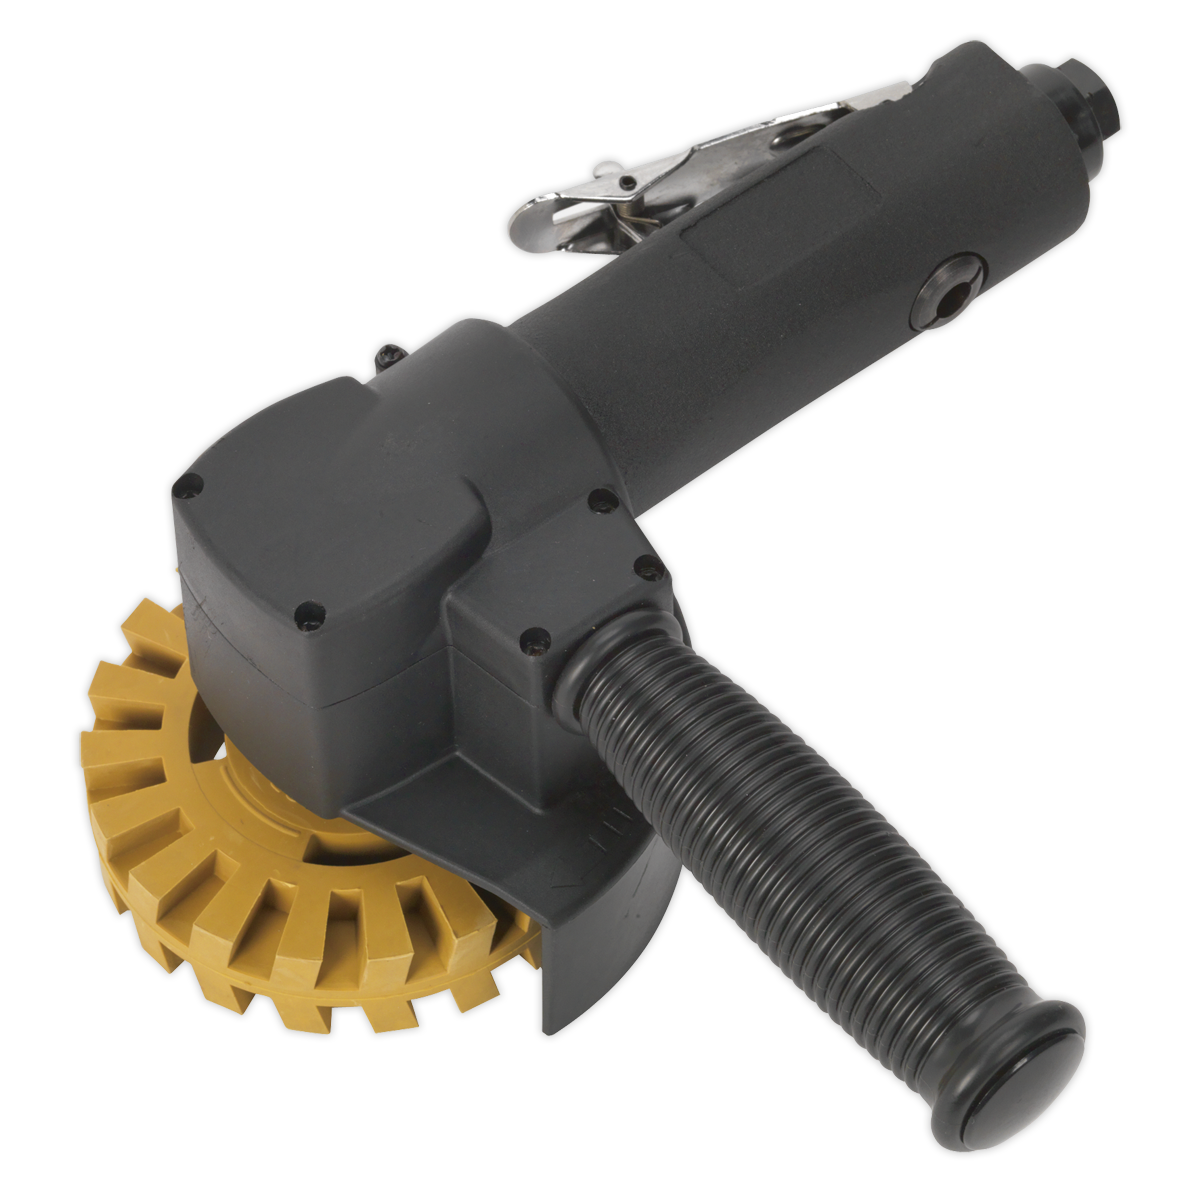 Powered by specifically designed air tool, featuring two handles for maximum control during use.